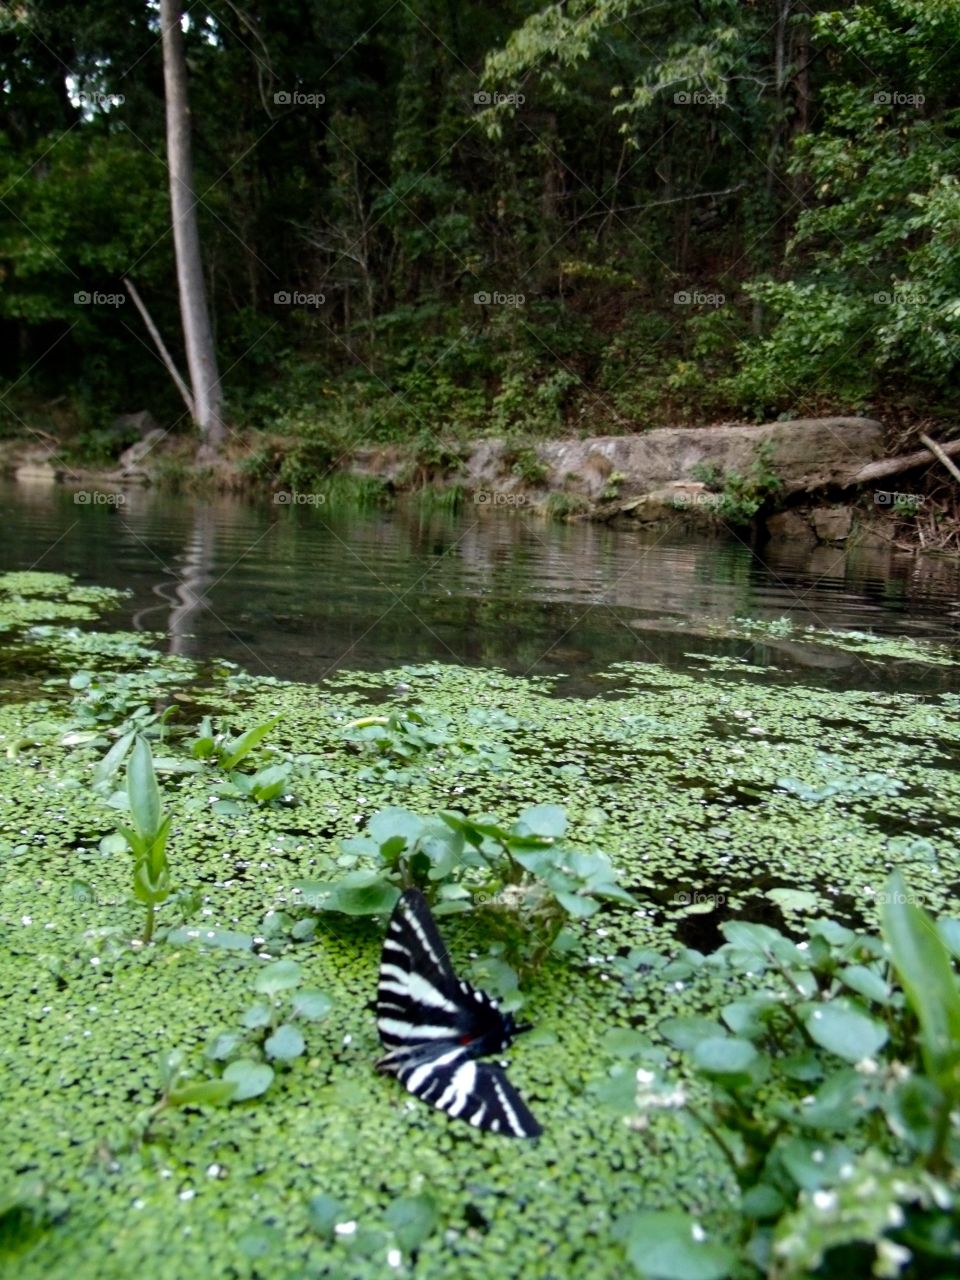 Butterfly on the water